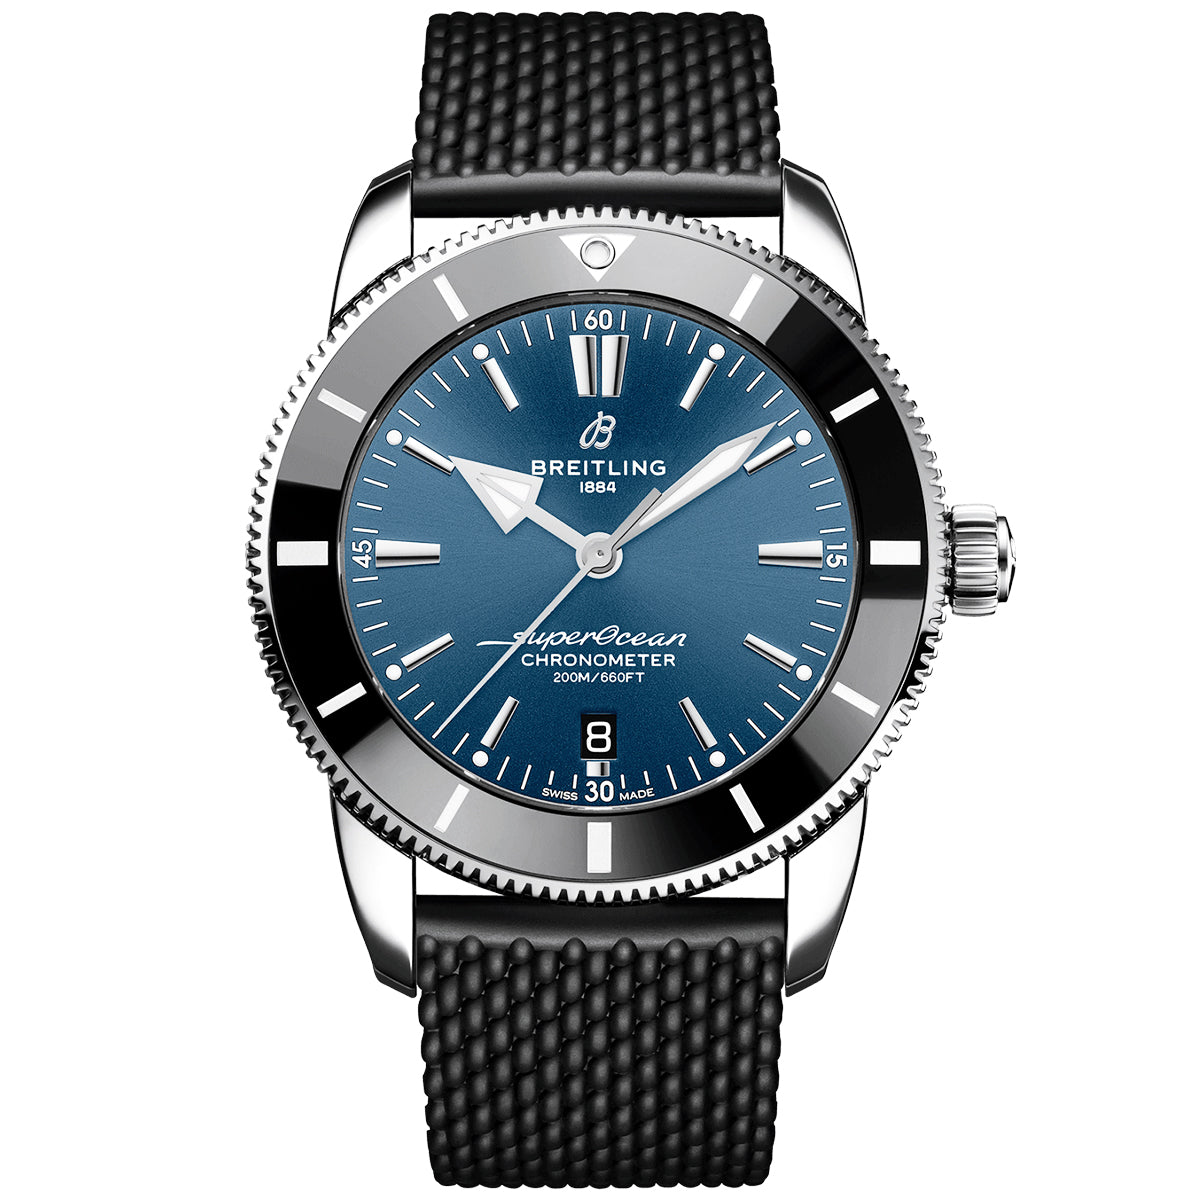 Superocean Heritage 44mm UK Limited Edition Men's Strap Watch